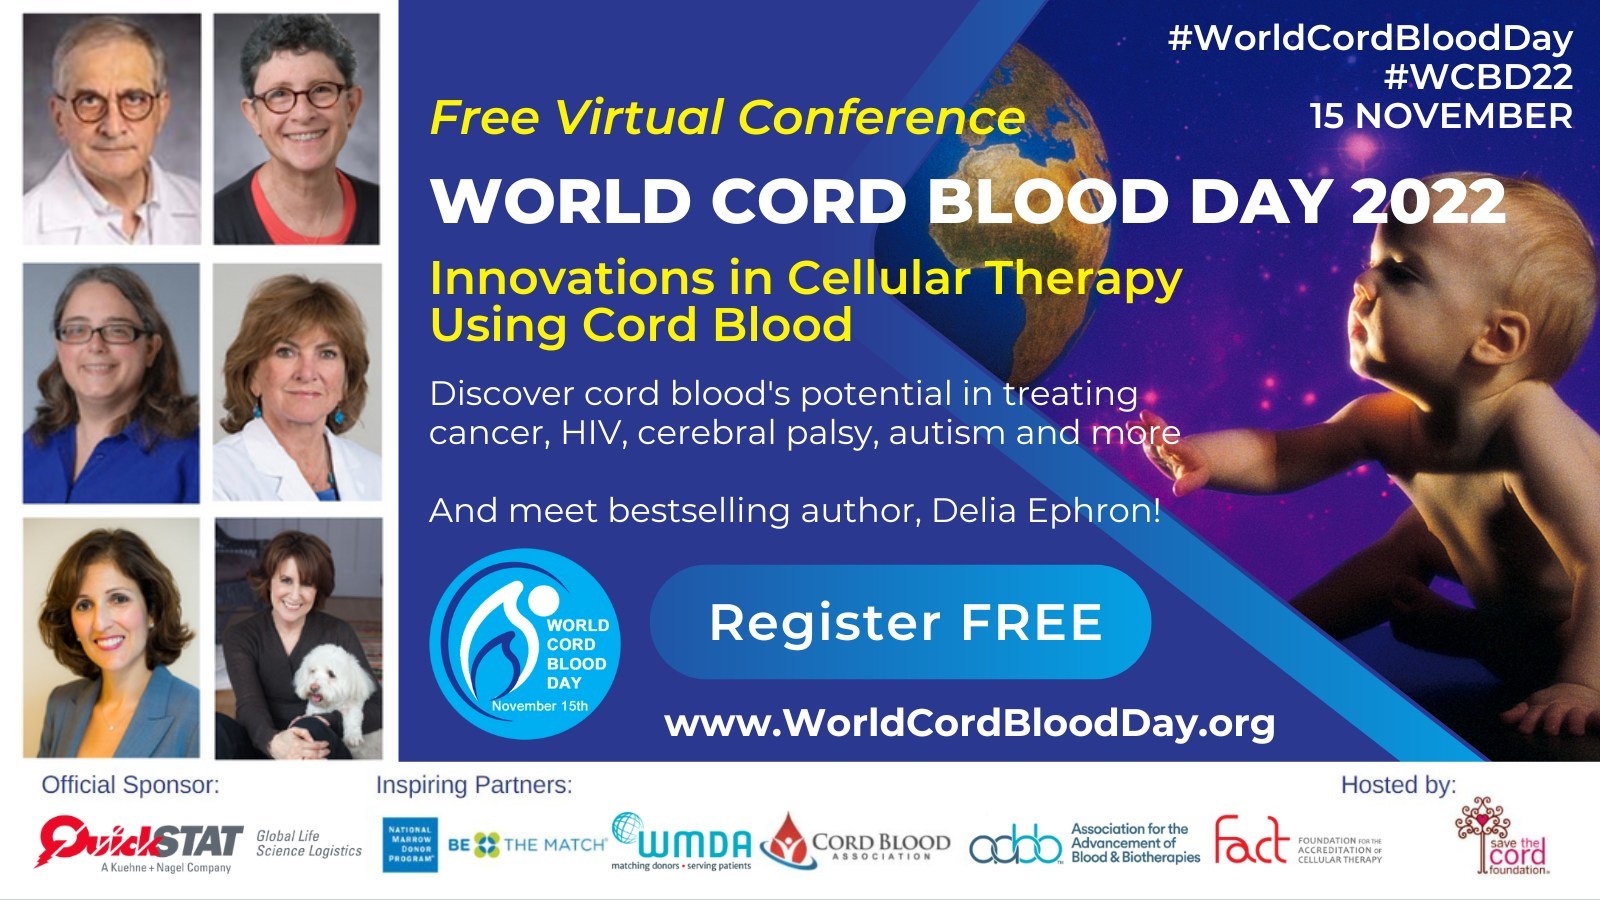 Save the Cord Foundation - Announcing speakers for free virtual conference